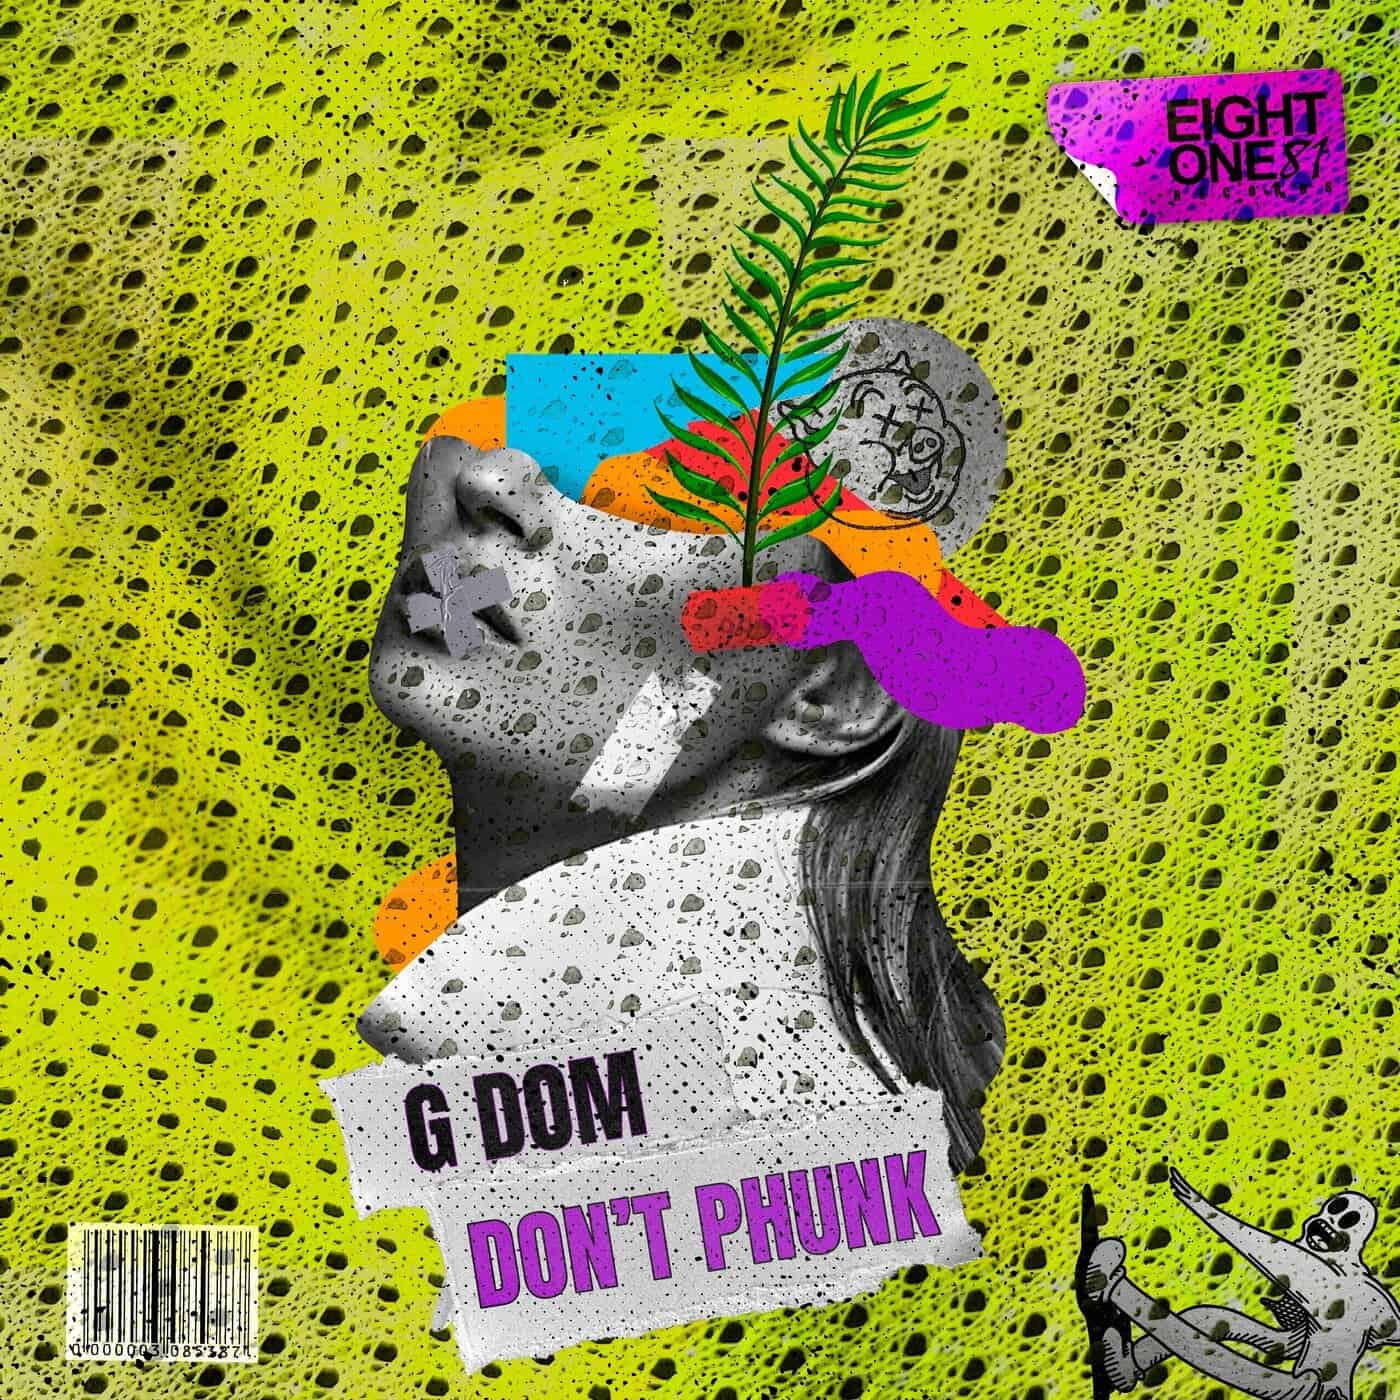 Download G DOM - Don't Phunk on Electrobuzz